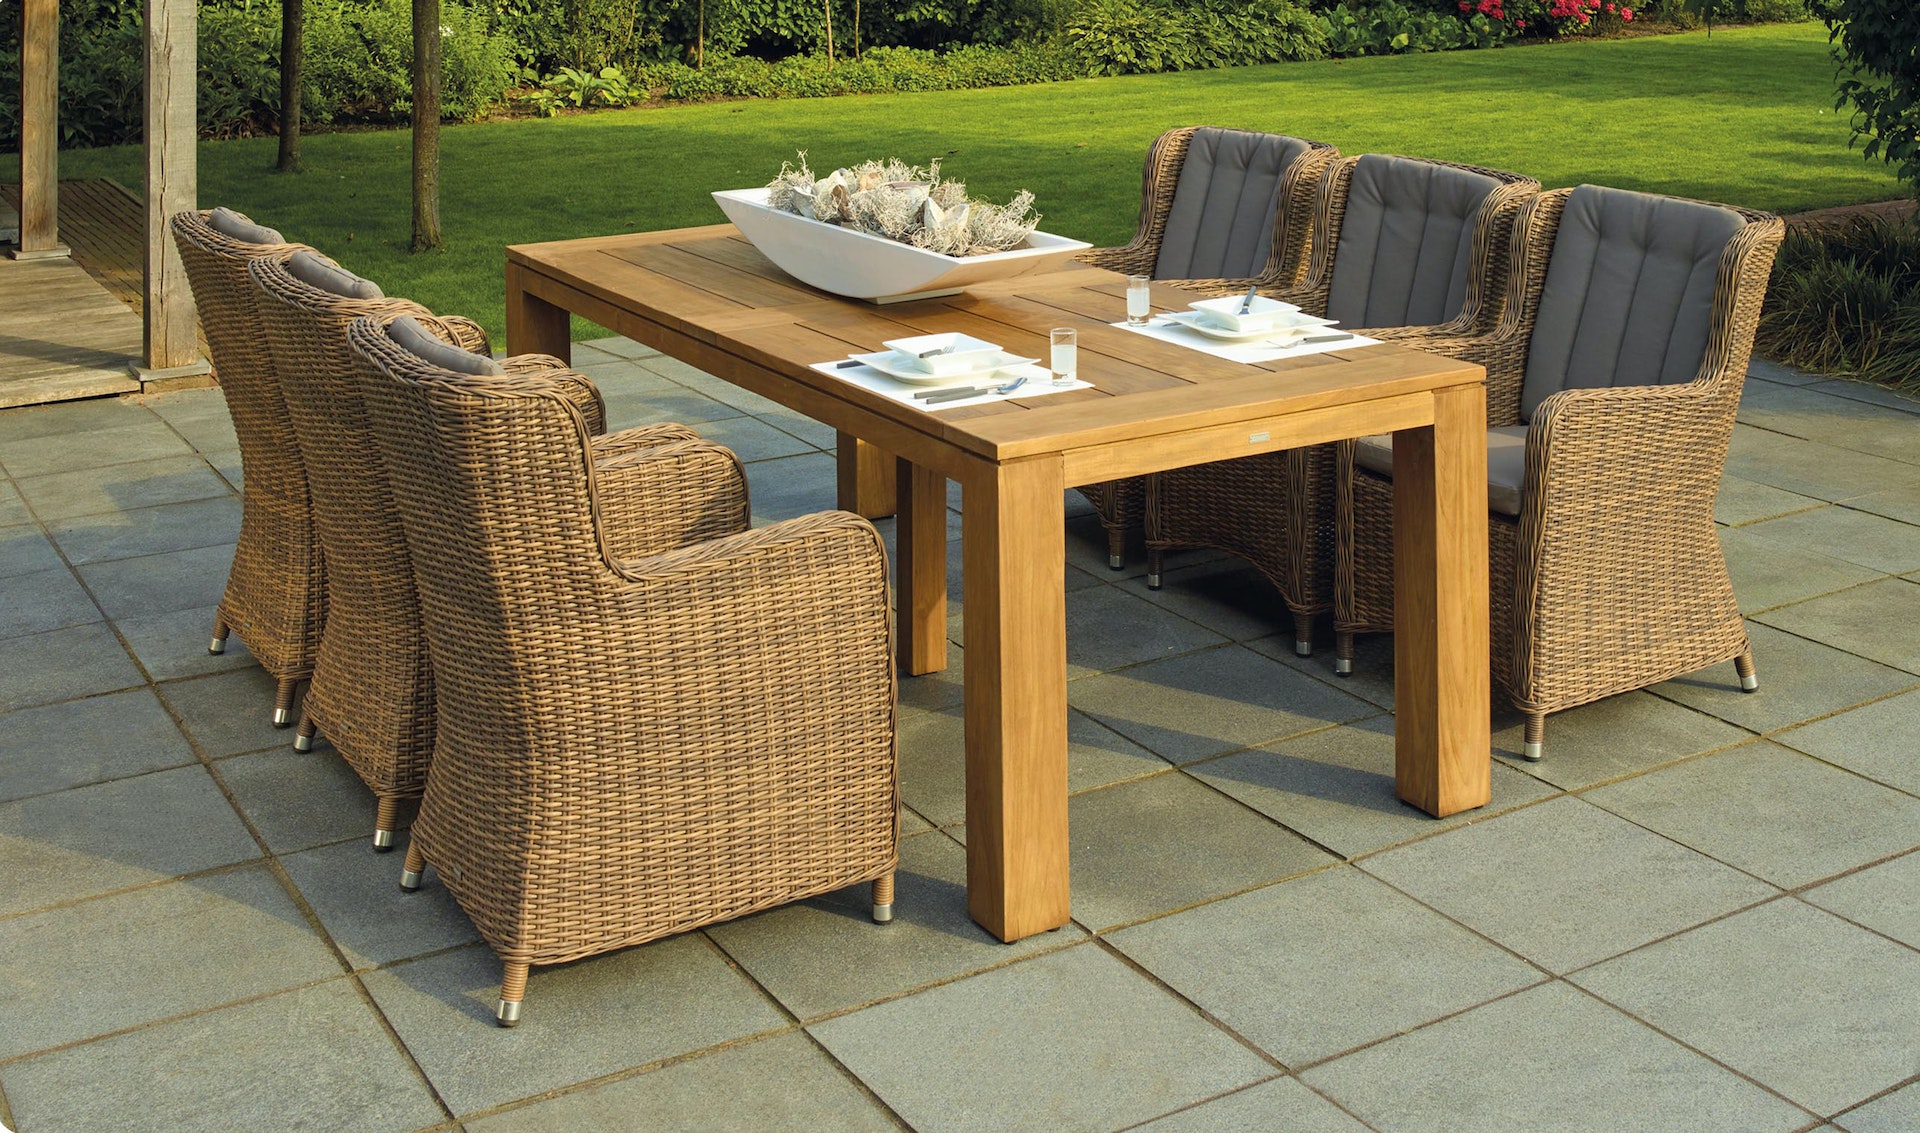 5 Tips for Buying Outdoor Furniture